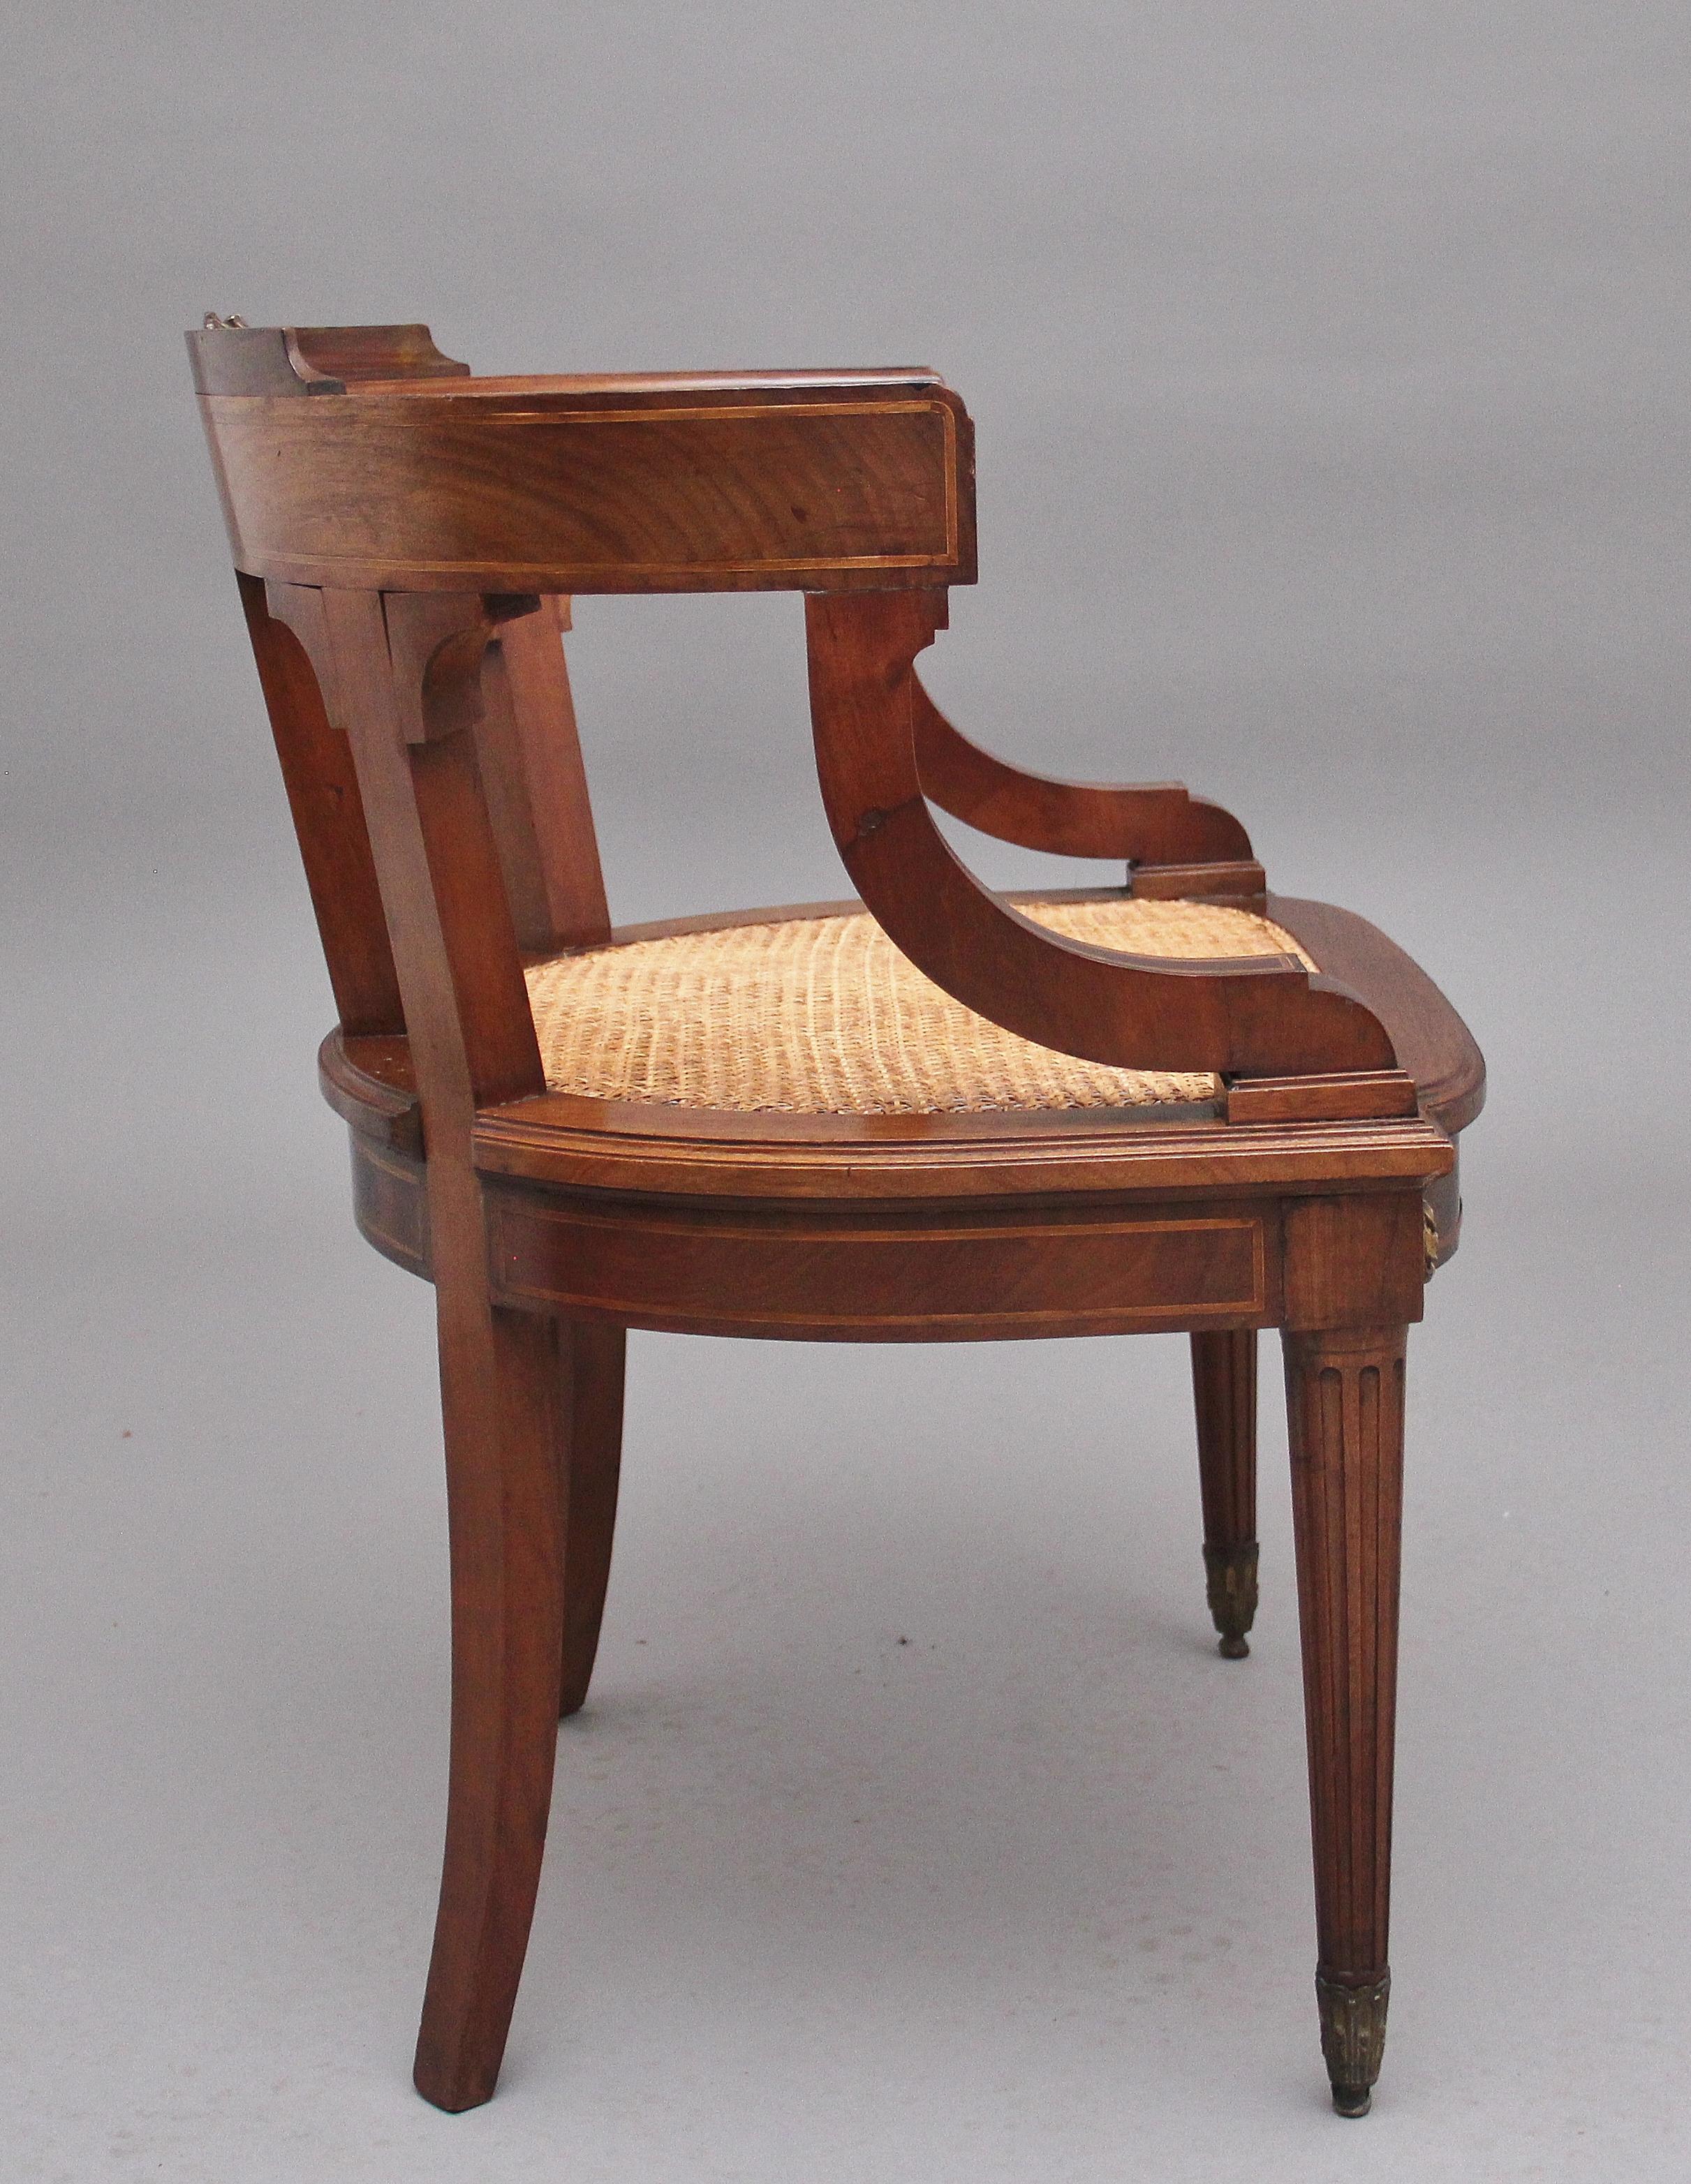 An elegant and decorative 19th Century French mahogany desk chair with a cane seat, having a curved back with fluted central splat back, curved and inlaid arms, inlaid frame with decorative circular patraes, standing on front turned and fluted legs